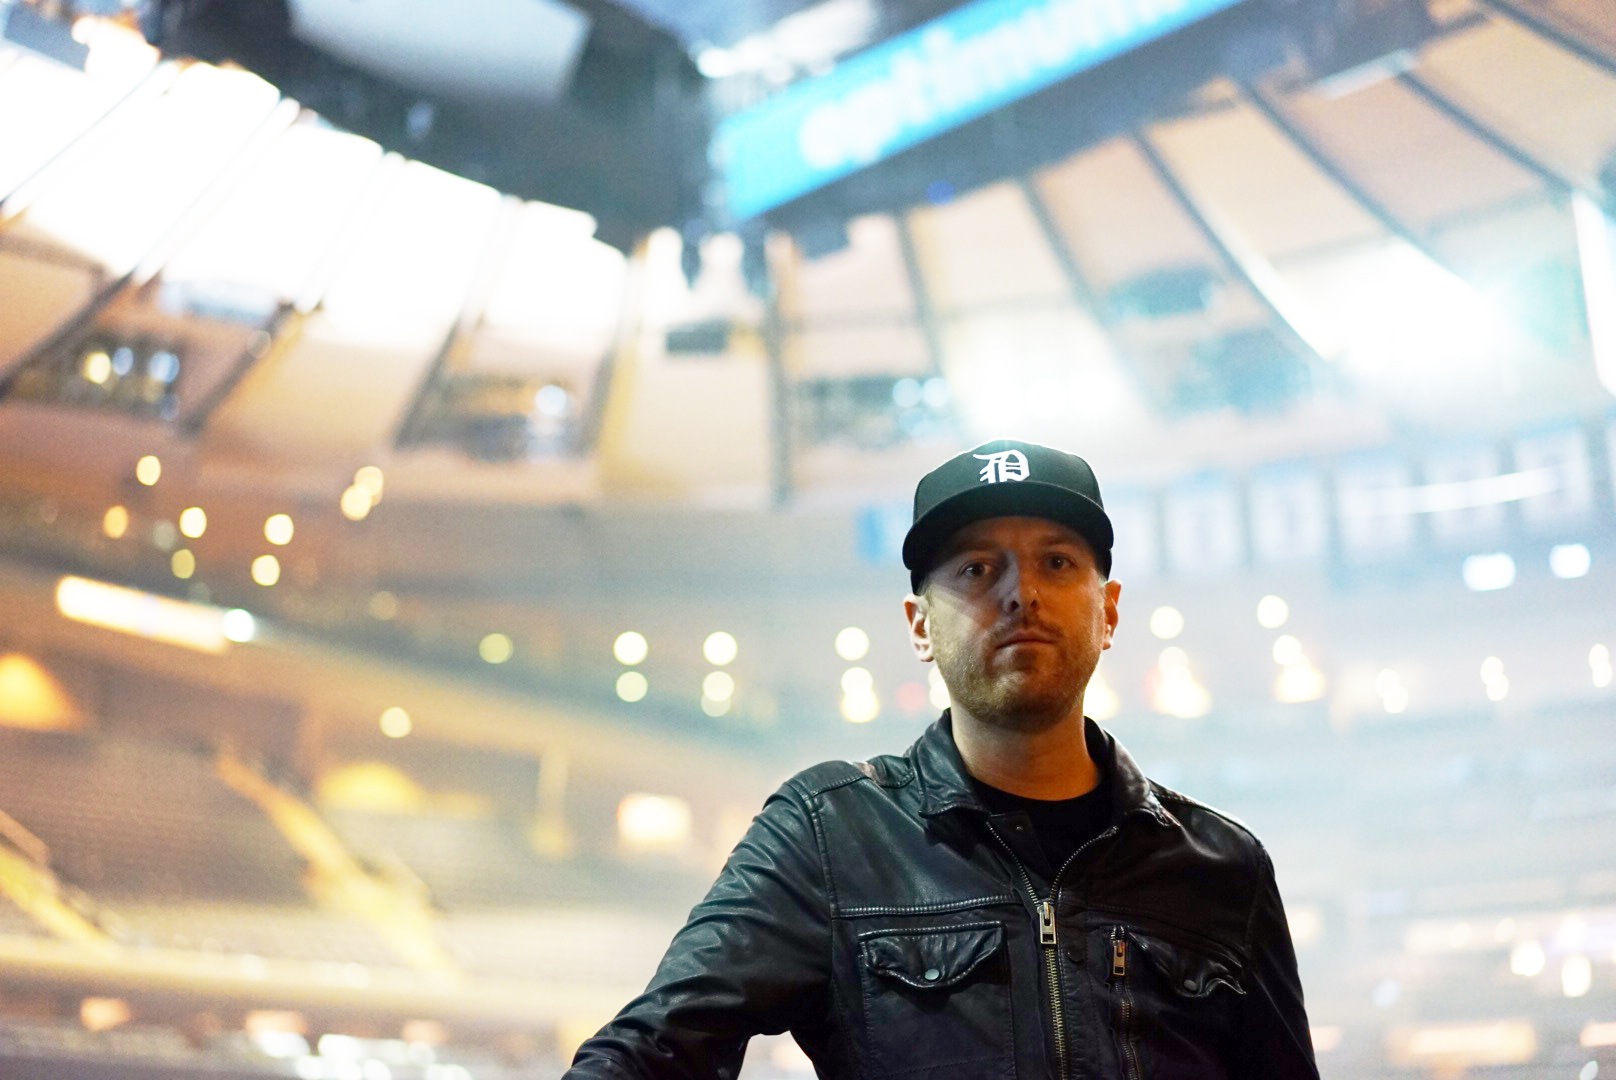 Chris Carhart onstage at Madison Square Garden before Phantogram's March 2015 show